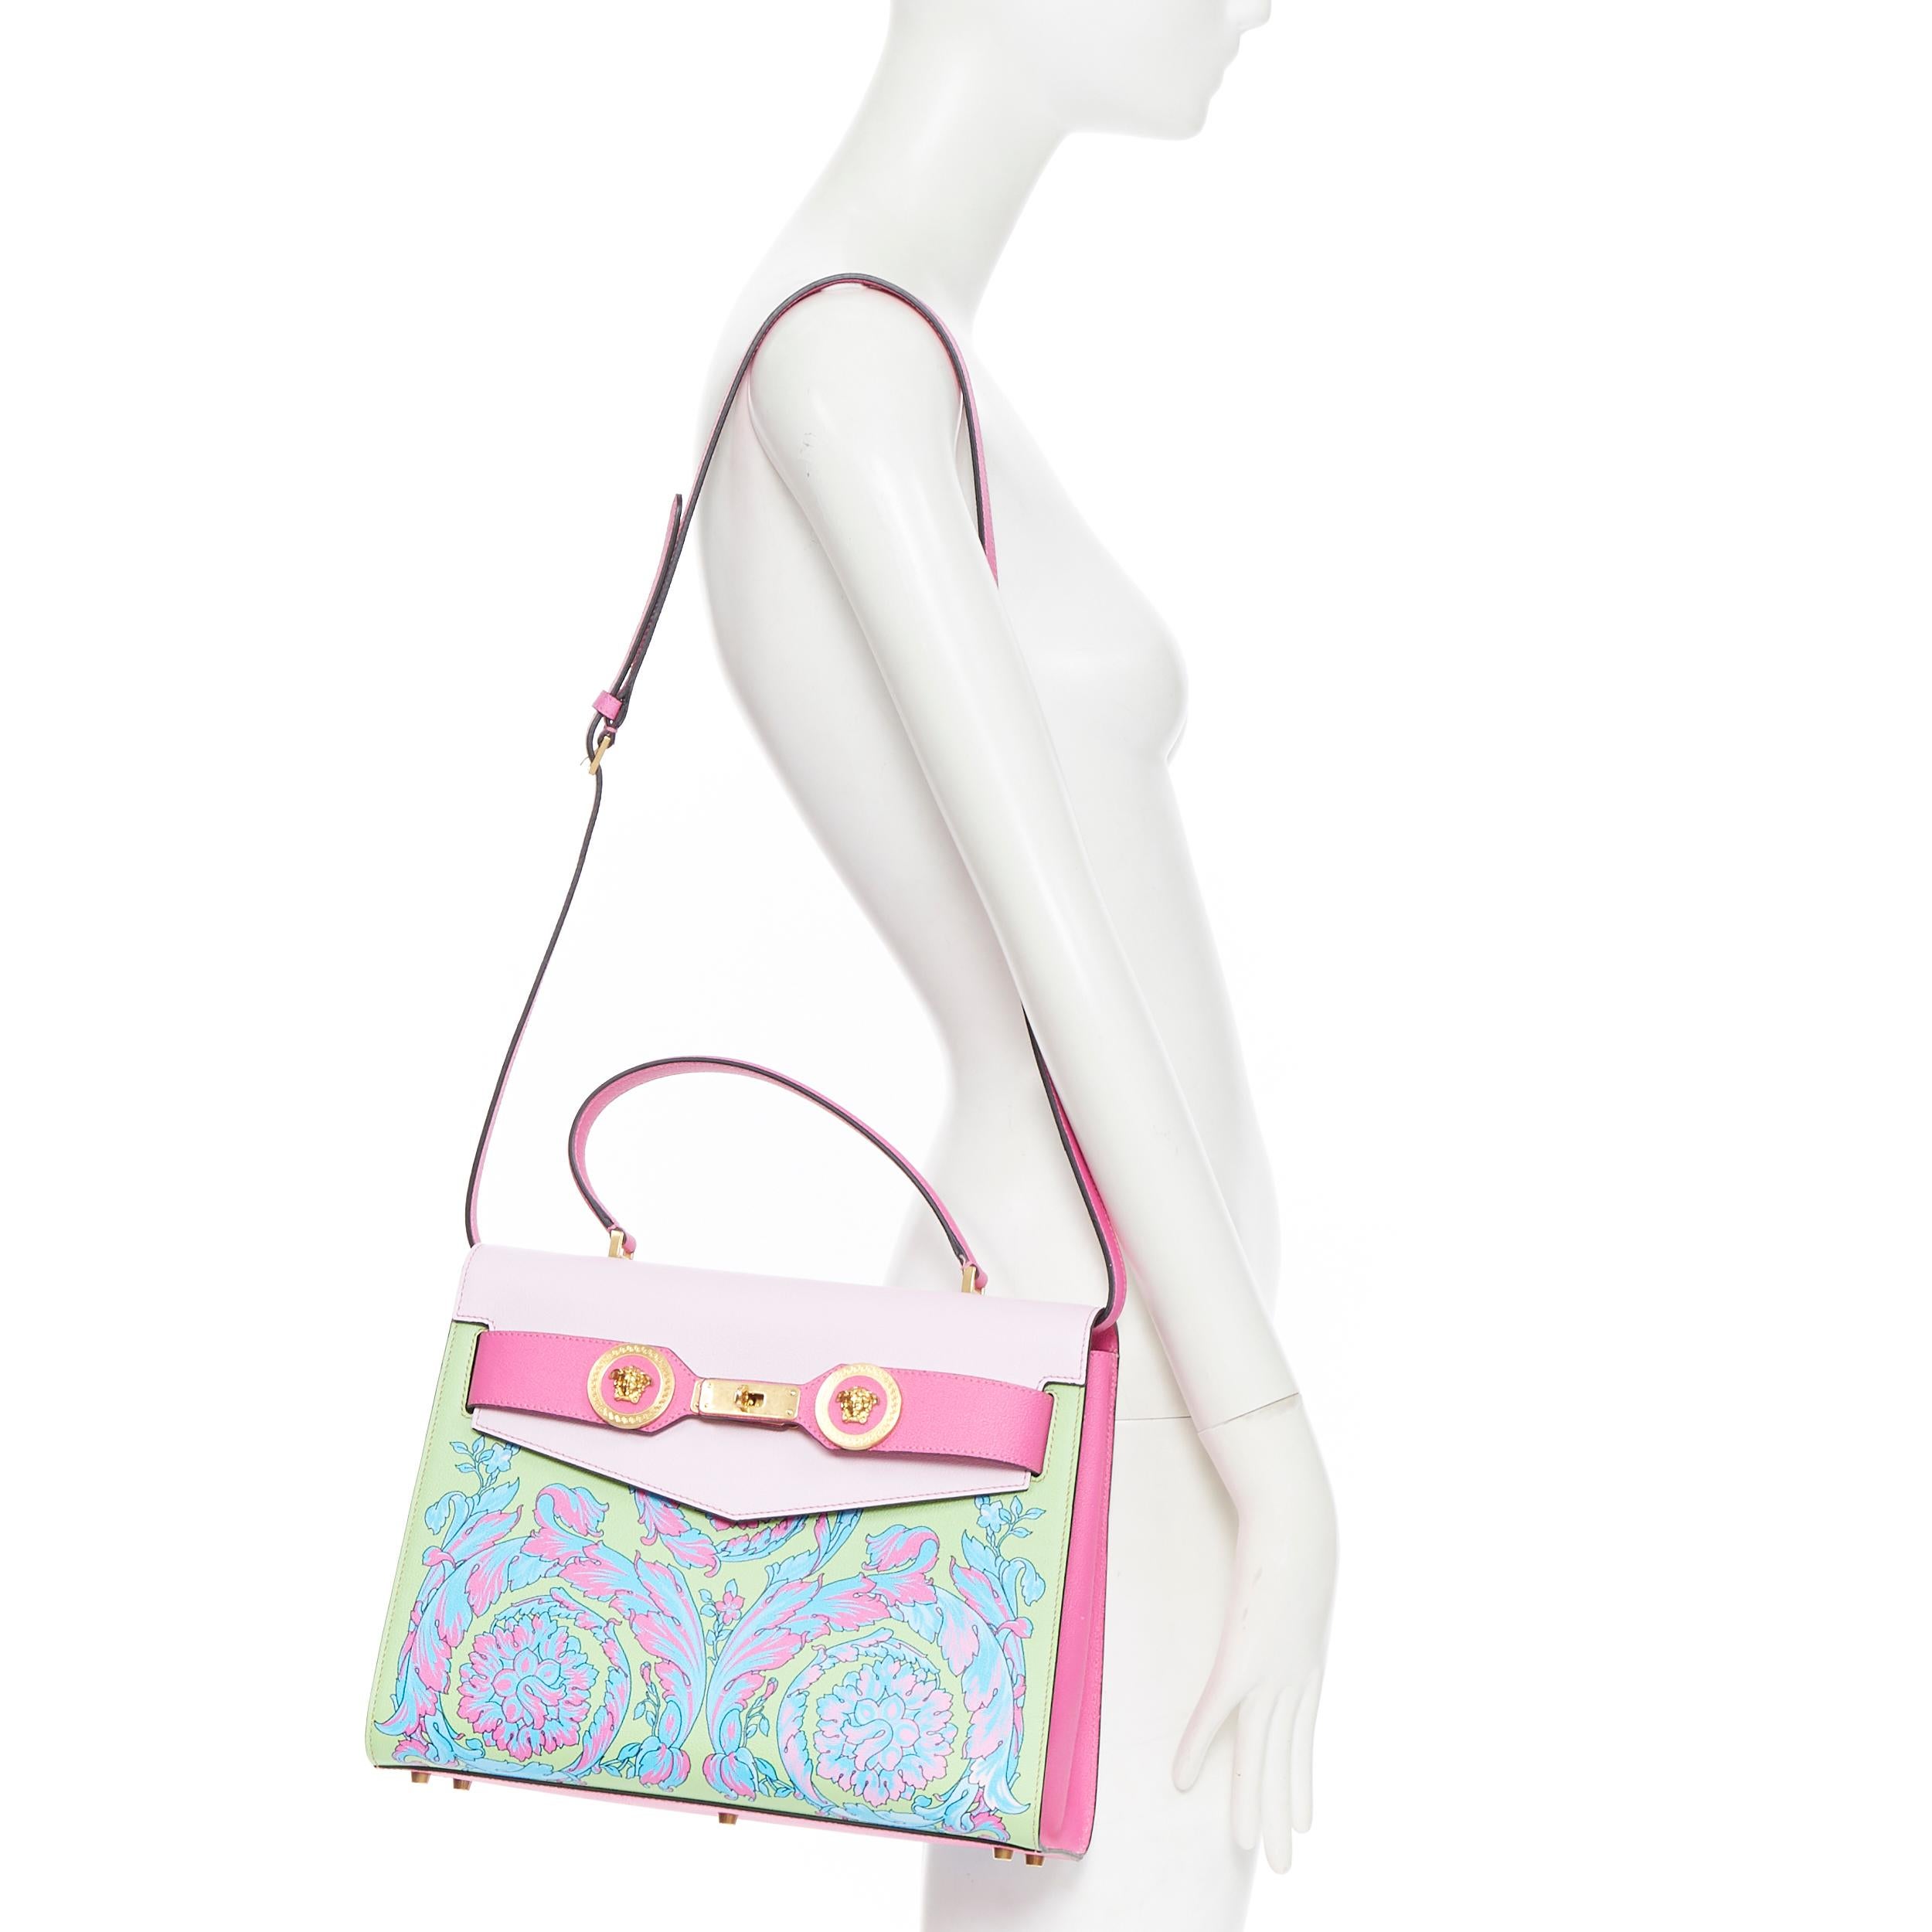 new VERSACE Tribute Diana Technicolor Baroque print top handle Kelly satchel bag
Brand: Versace
Designer: Donatella Versace
Collection: 2019
Model Name / Style: Tribute Diana
Material: Leather
Color: Pink
Pattern: Floral
Closure: Turnlock
Lining